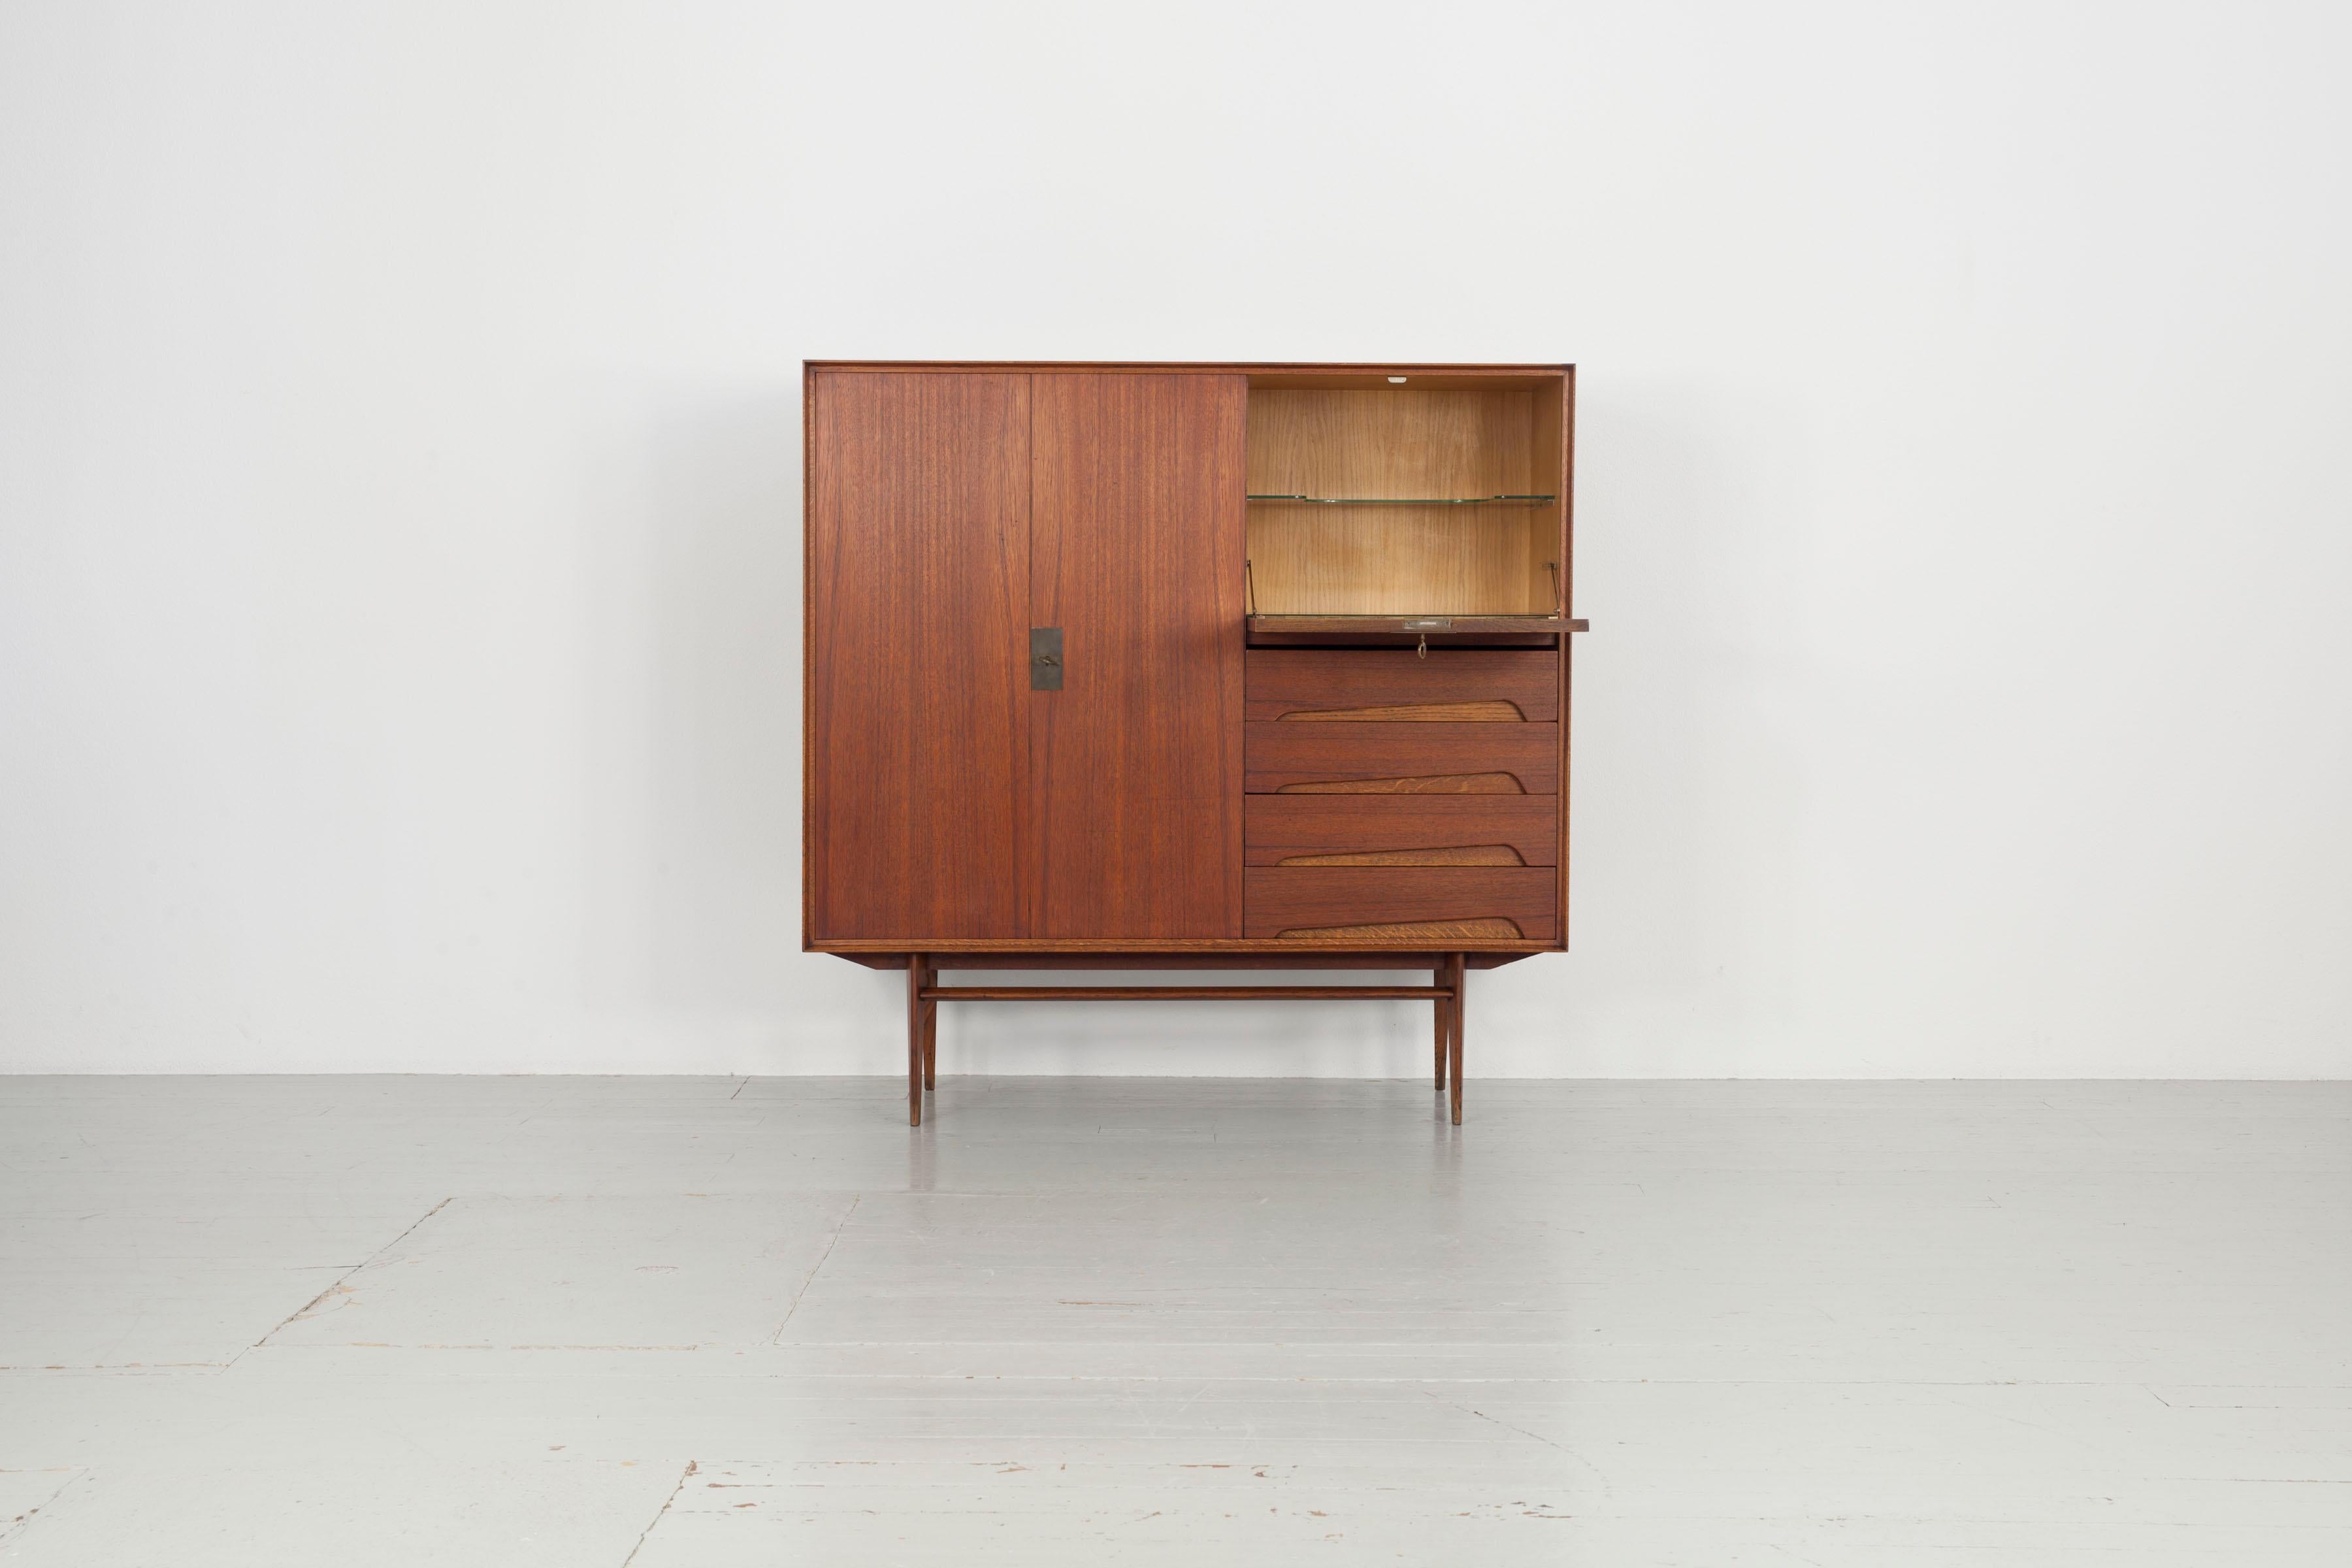 This sideboard has been crafted with teak and brass detailing. The drop-leaf door on the right hand side allows the sideboard to also function as a secretaire. The versatile sideboard offers plenty of room for storage, and remains in a very good